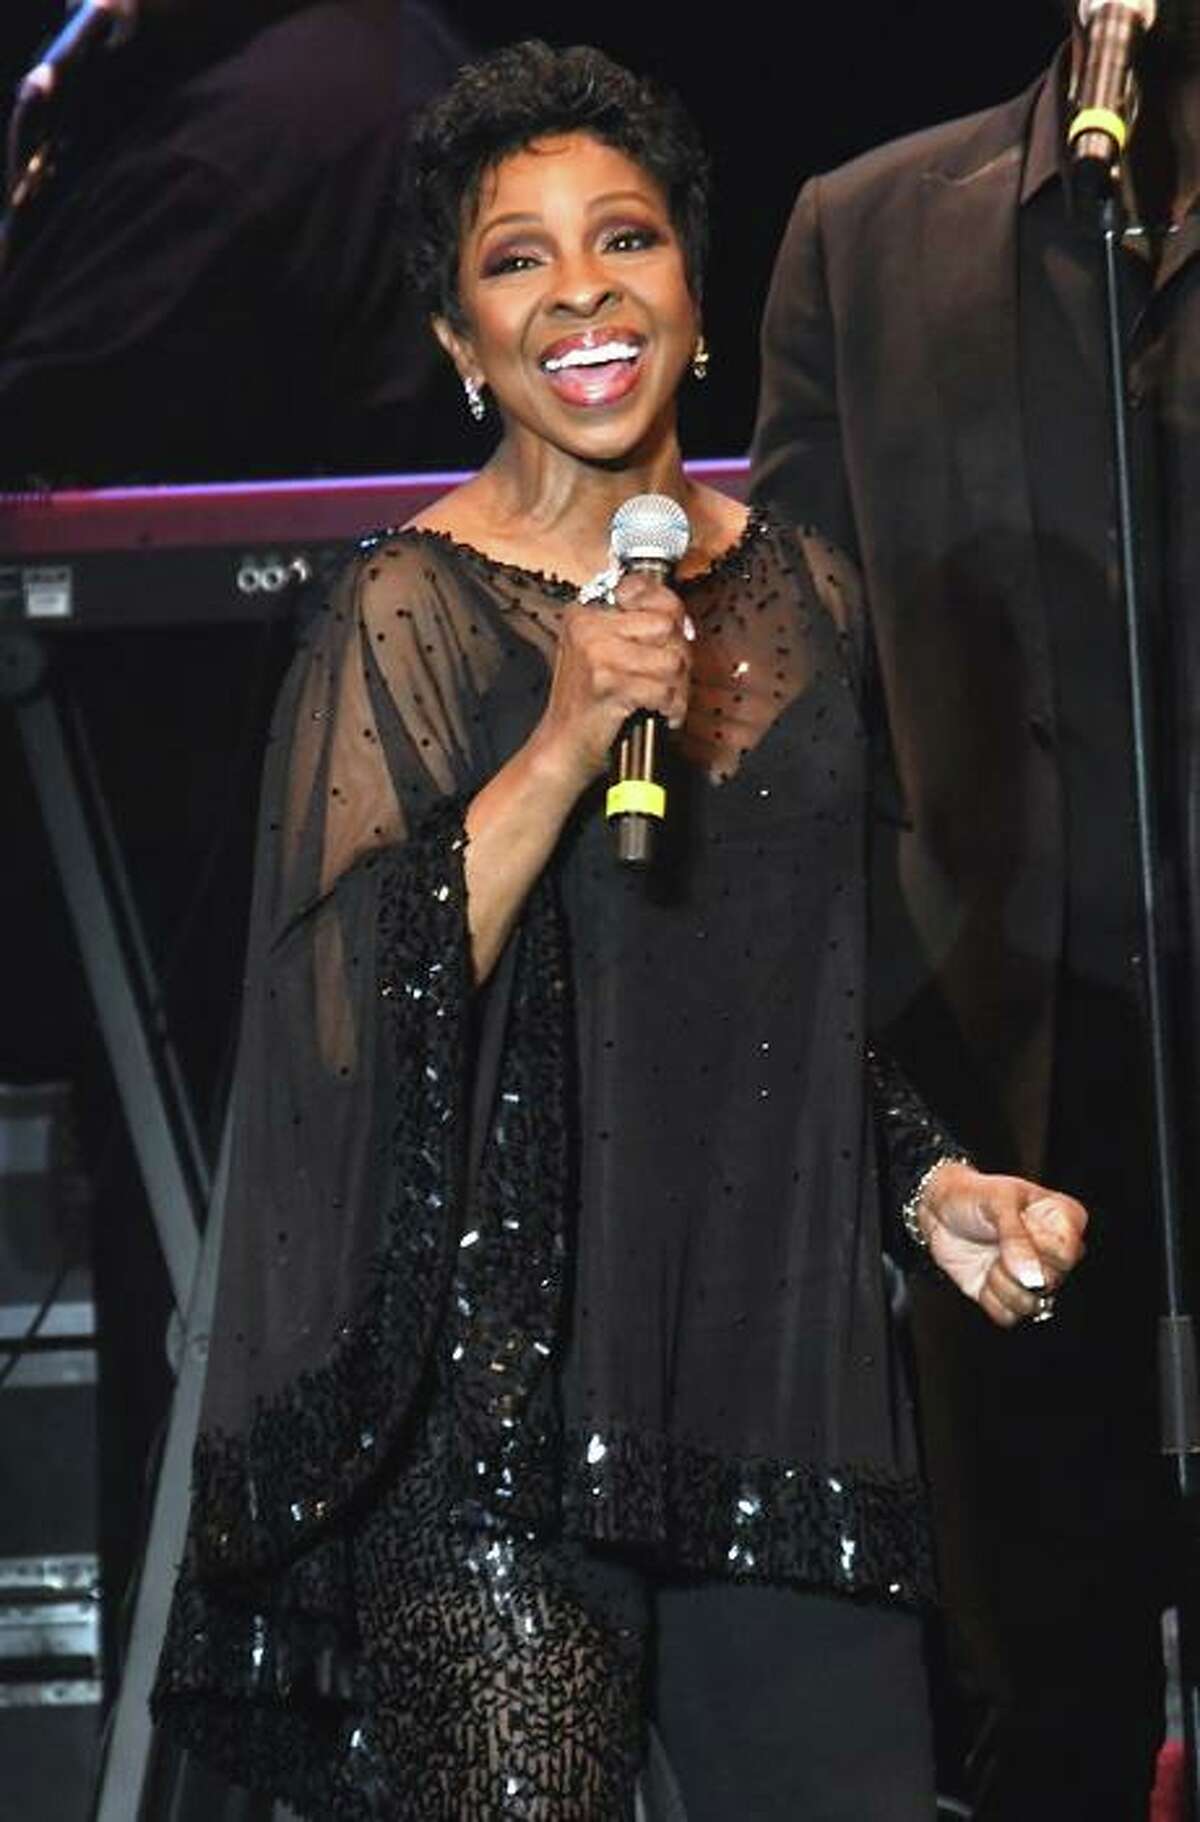 Gladys Knight will headline this year’s gala concert at the Tobin Center for the Performing Arts.